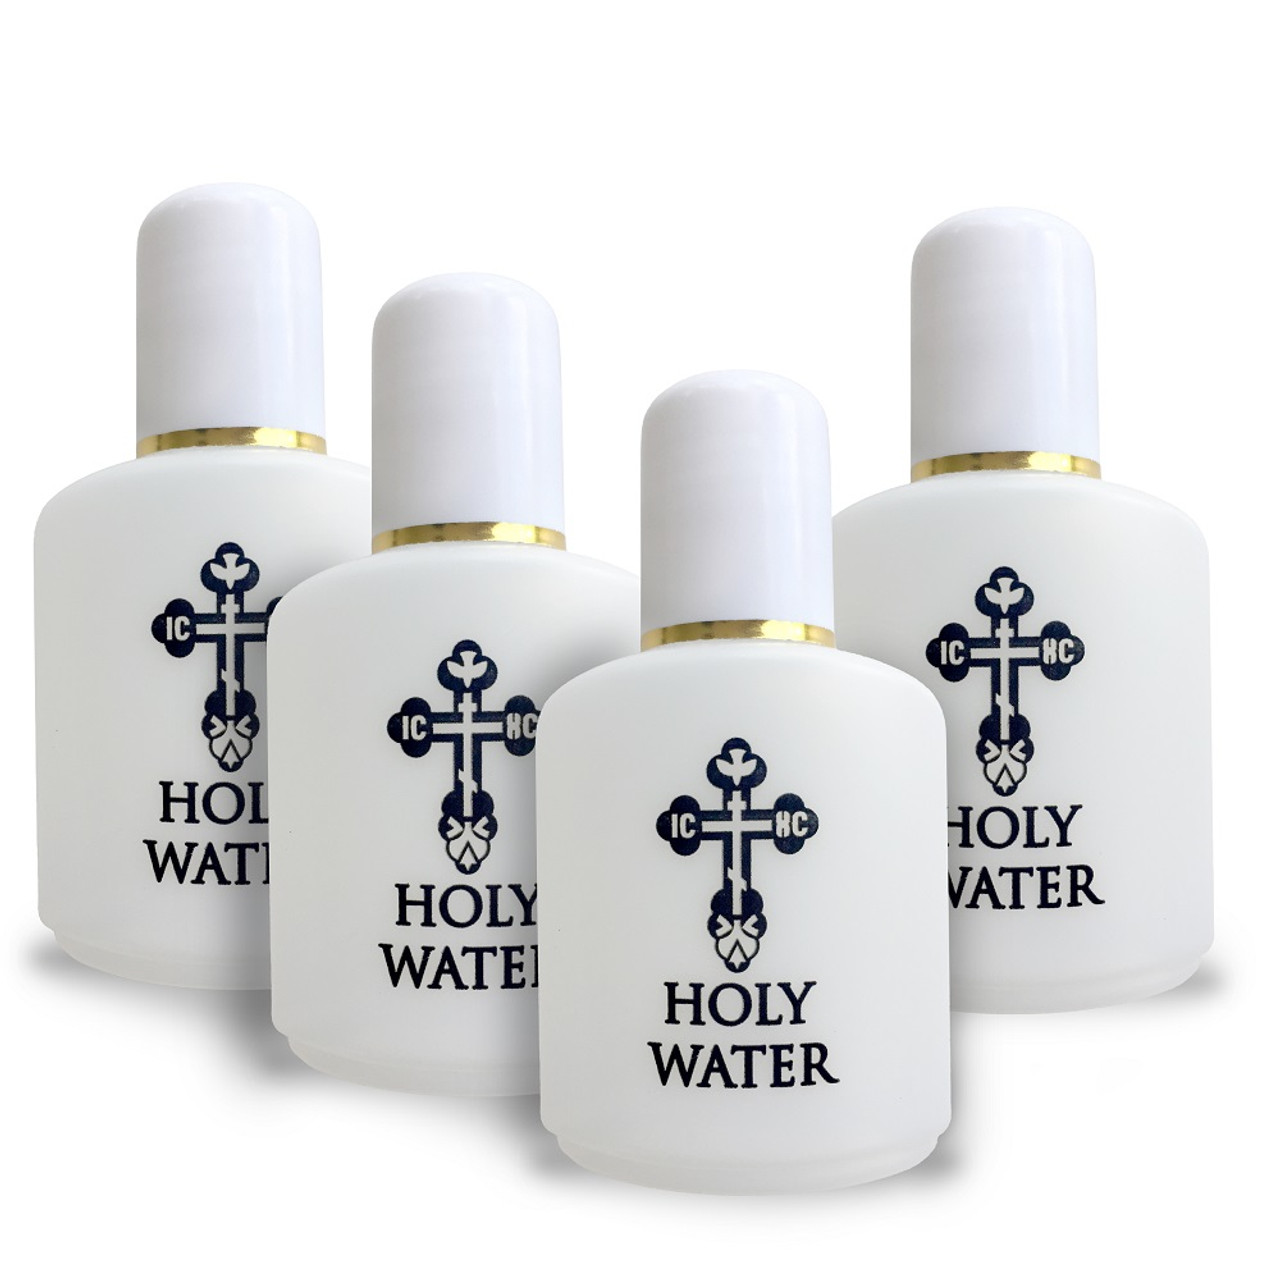 Holy water use